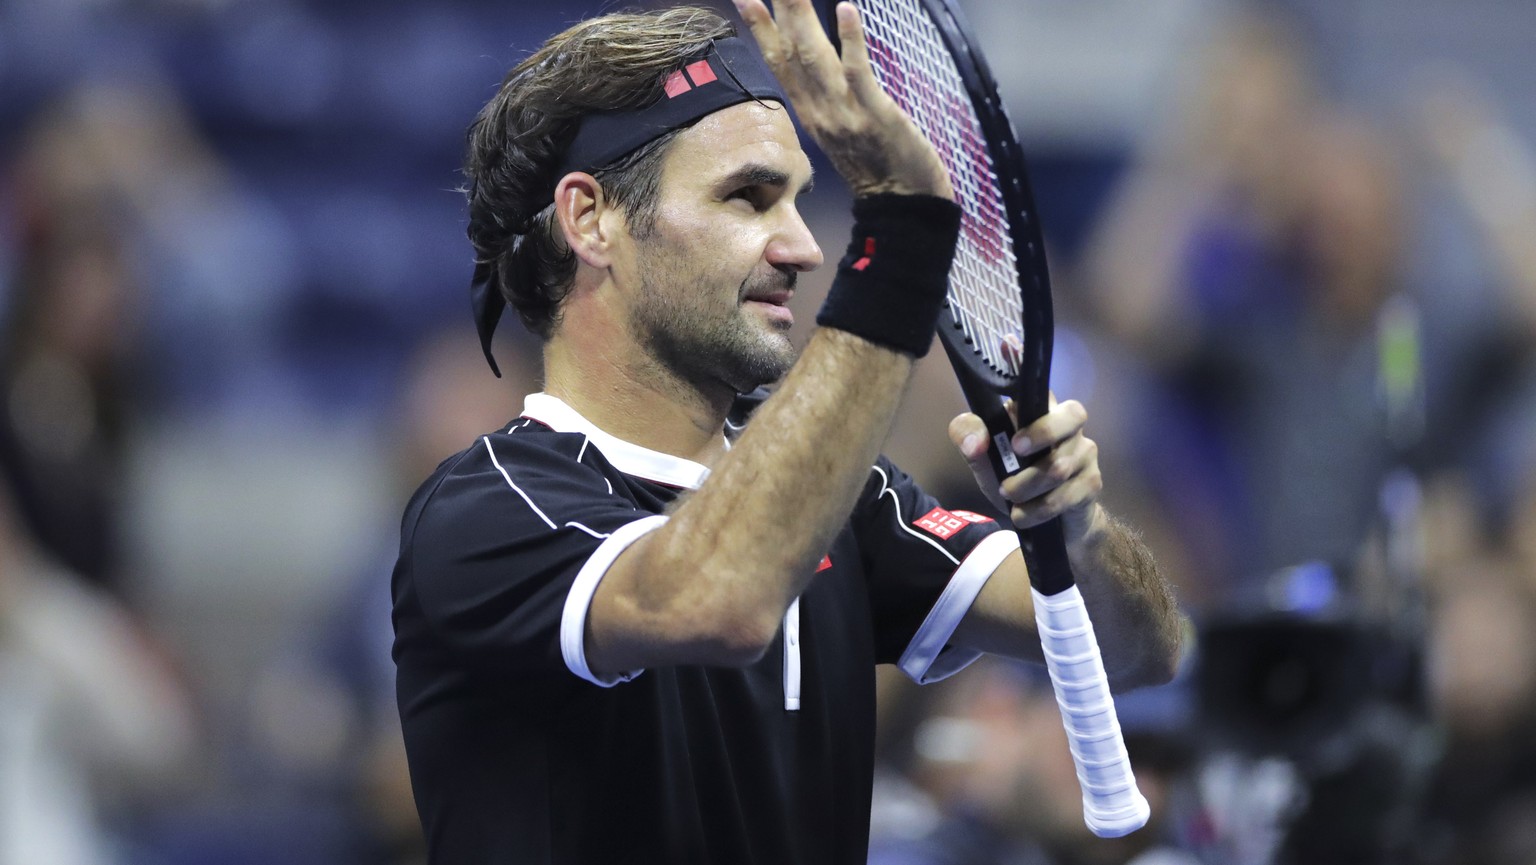 Roger Federer acknowledges the crowd after defeating Sumit Nagal during the first round of the U.S. Open tennis tournament in New York, Monday, Aug. 26, 2019. Federer won 4-6, 6-1, 6-1, 6-4. (AP Photo ...